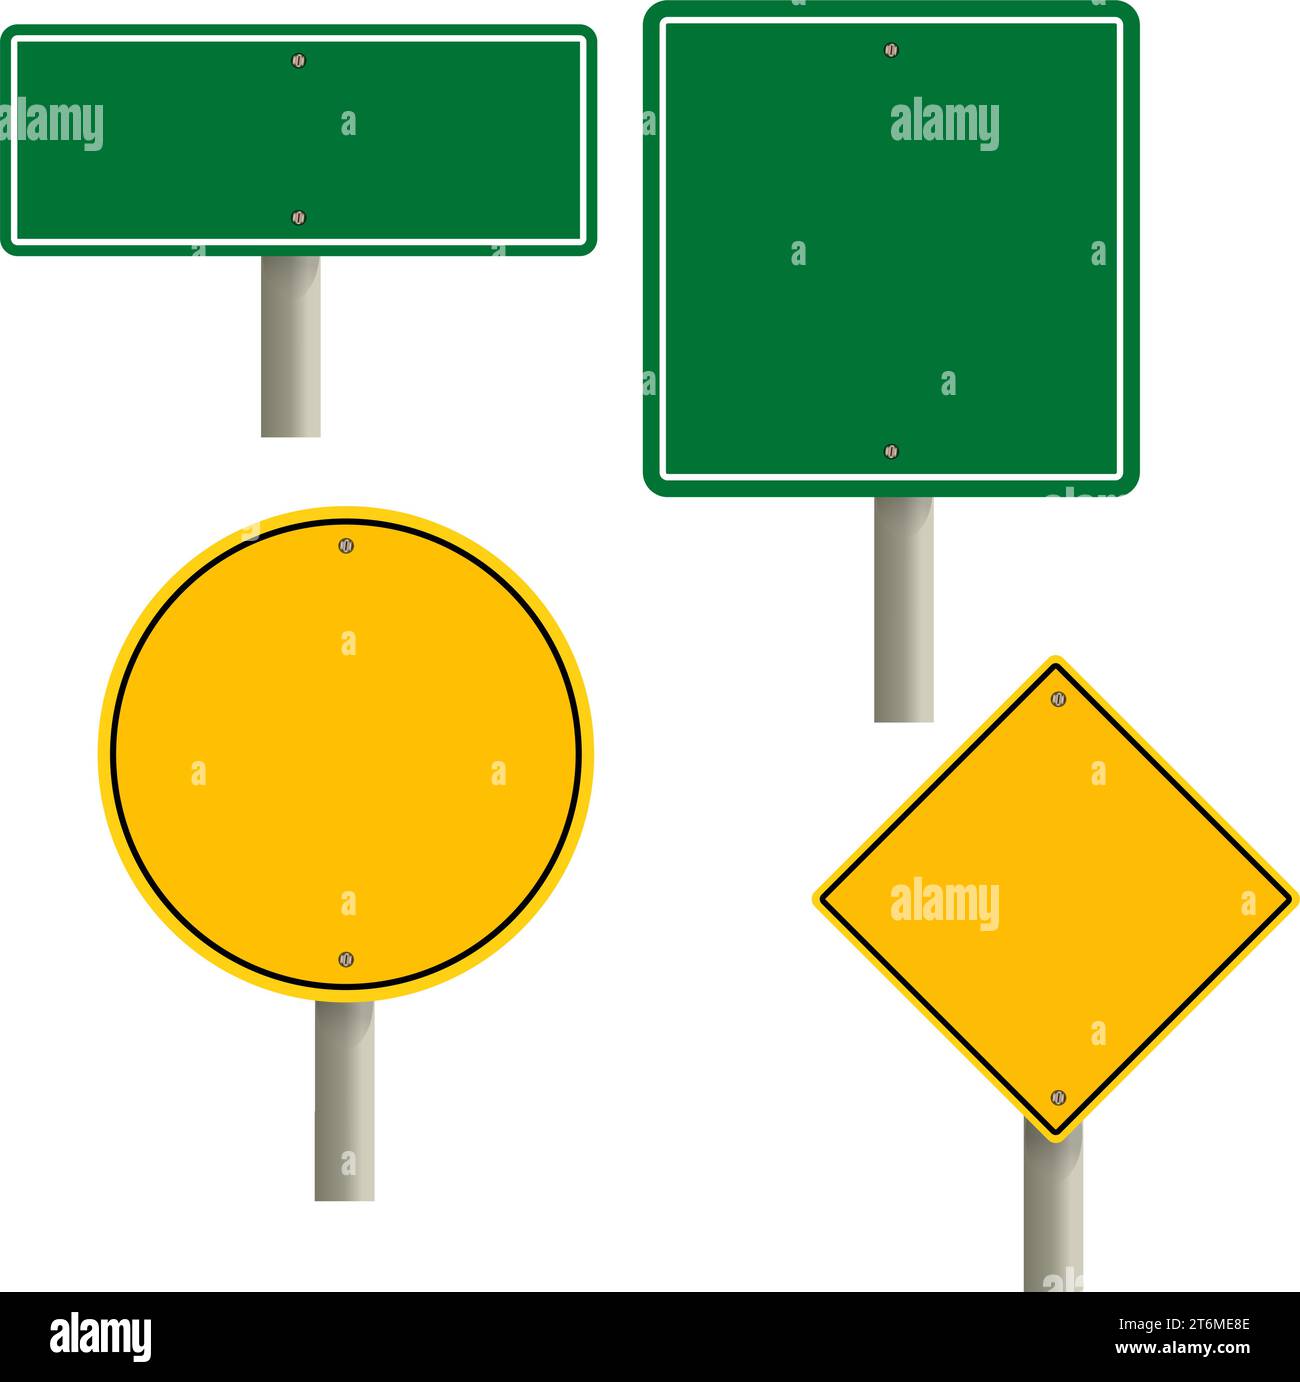 road sign blank template. Road sign set traffic blank sign mockup blank. Highway signs.  yellow pointers on the road, traffic control signs. Stock Vector